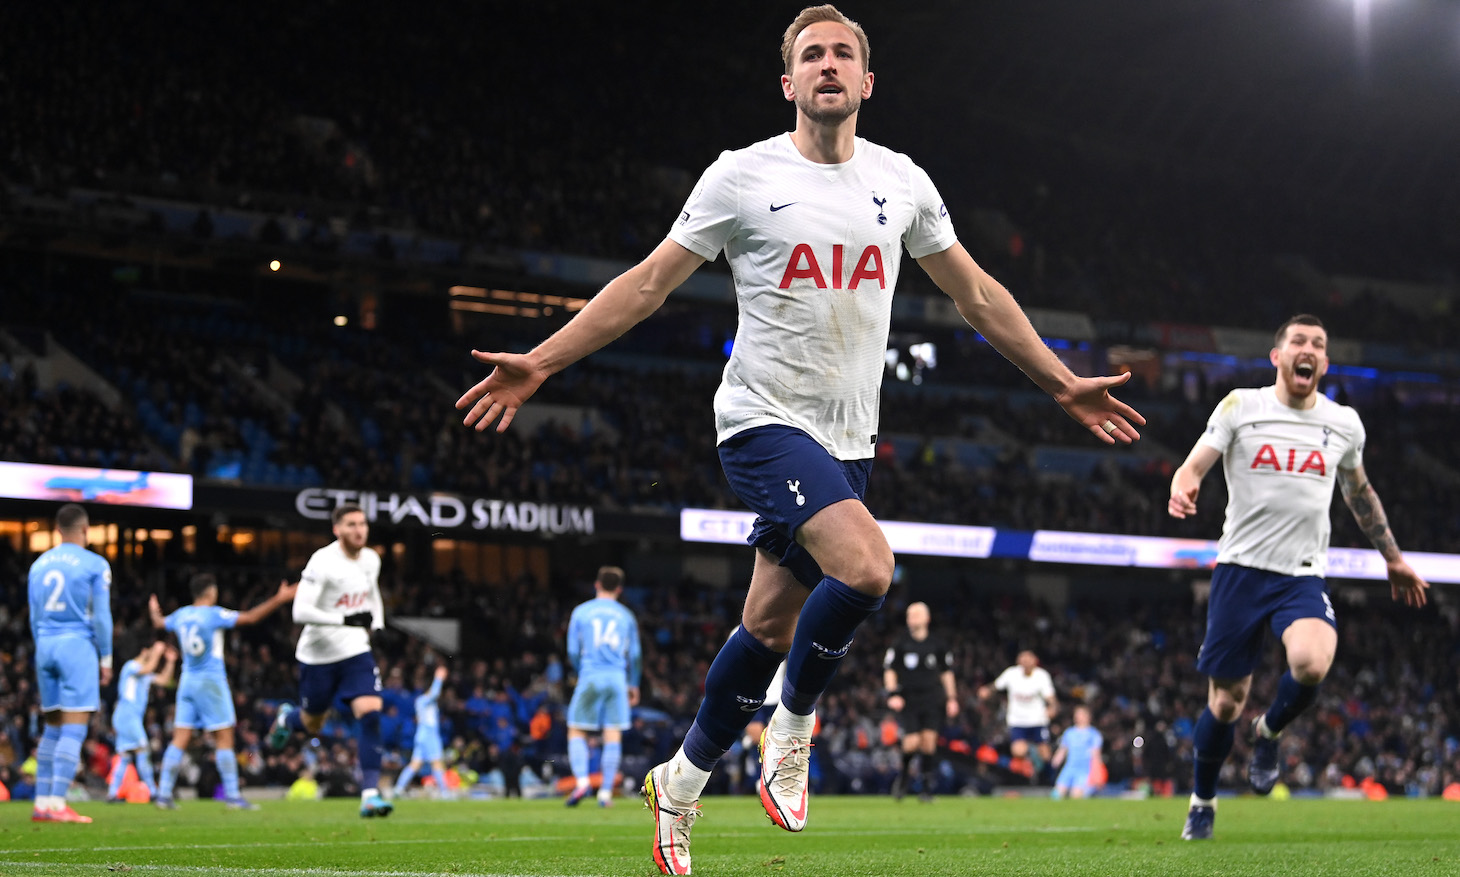 Harry Kane of Tottenham Hotspur celebrates after scoring their side's third goal during the Premier League match between Manchester City and Tottenham Hotspur at Etihad Stadium on February 19, 2022 in Manchester, England.